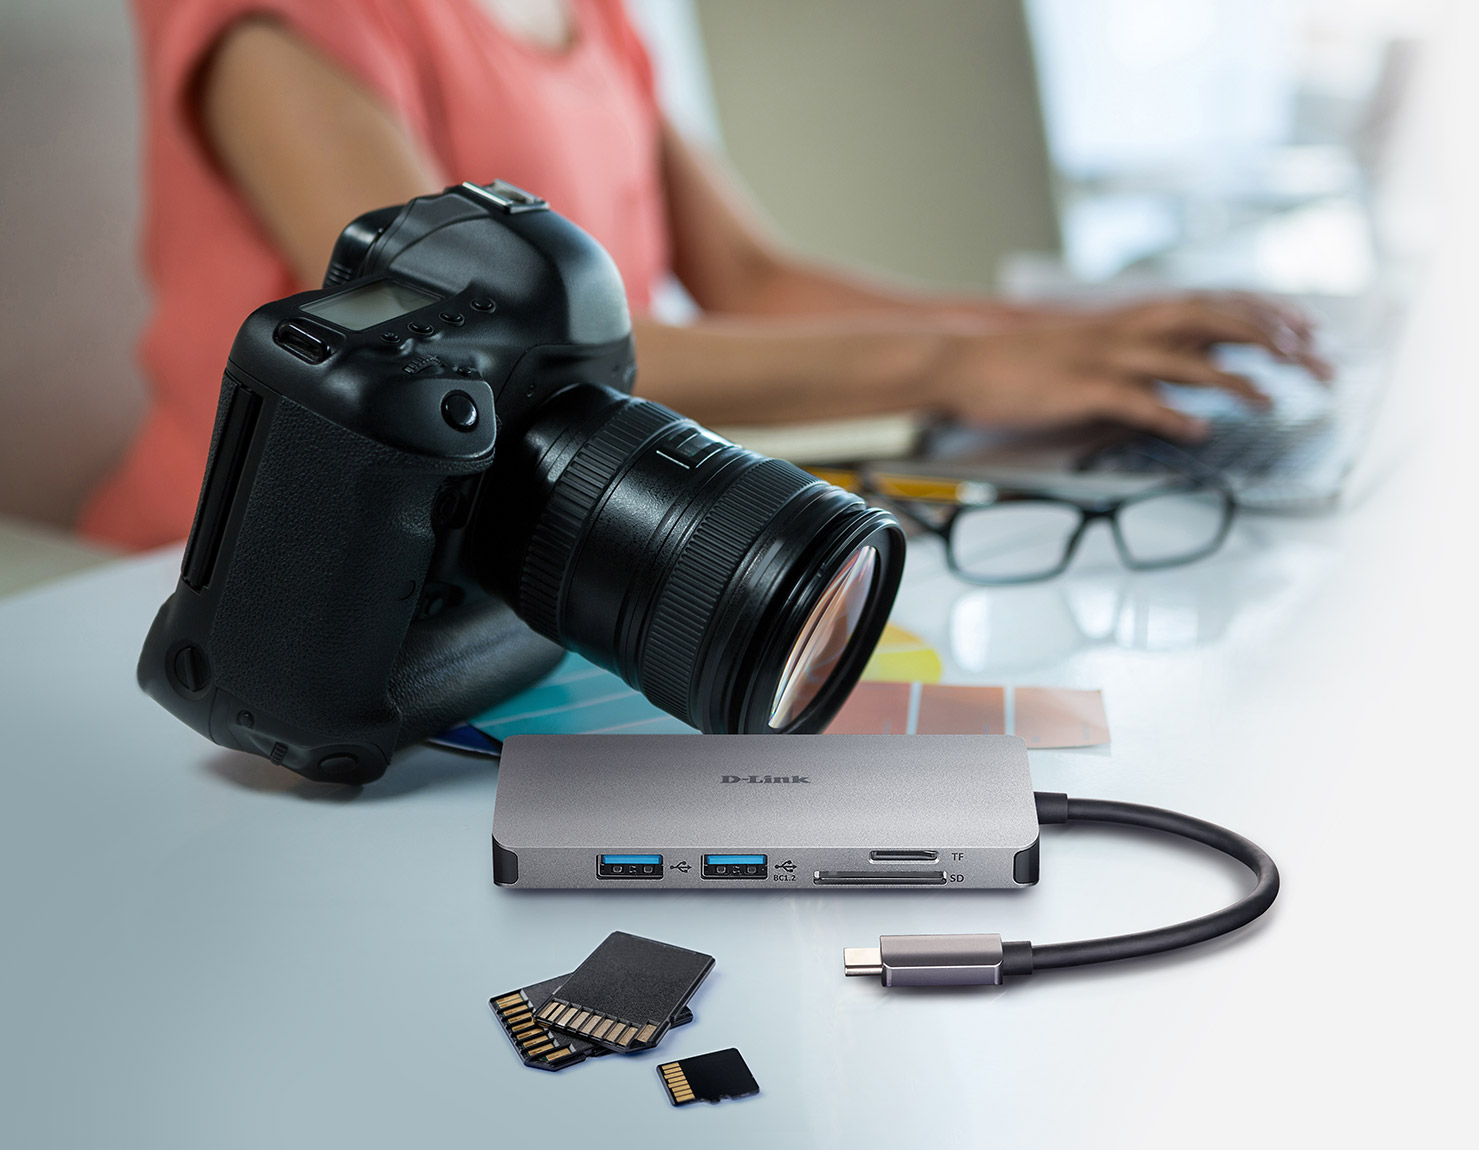 6-in-1 USB-C Hub with HDMI/Card Reader/Power Delivery next a camera and SD cards and microSD cards